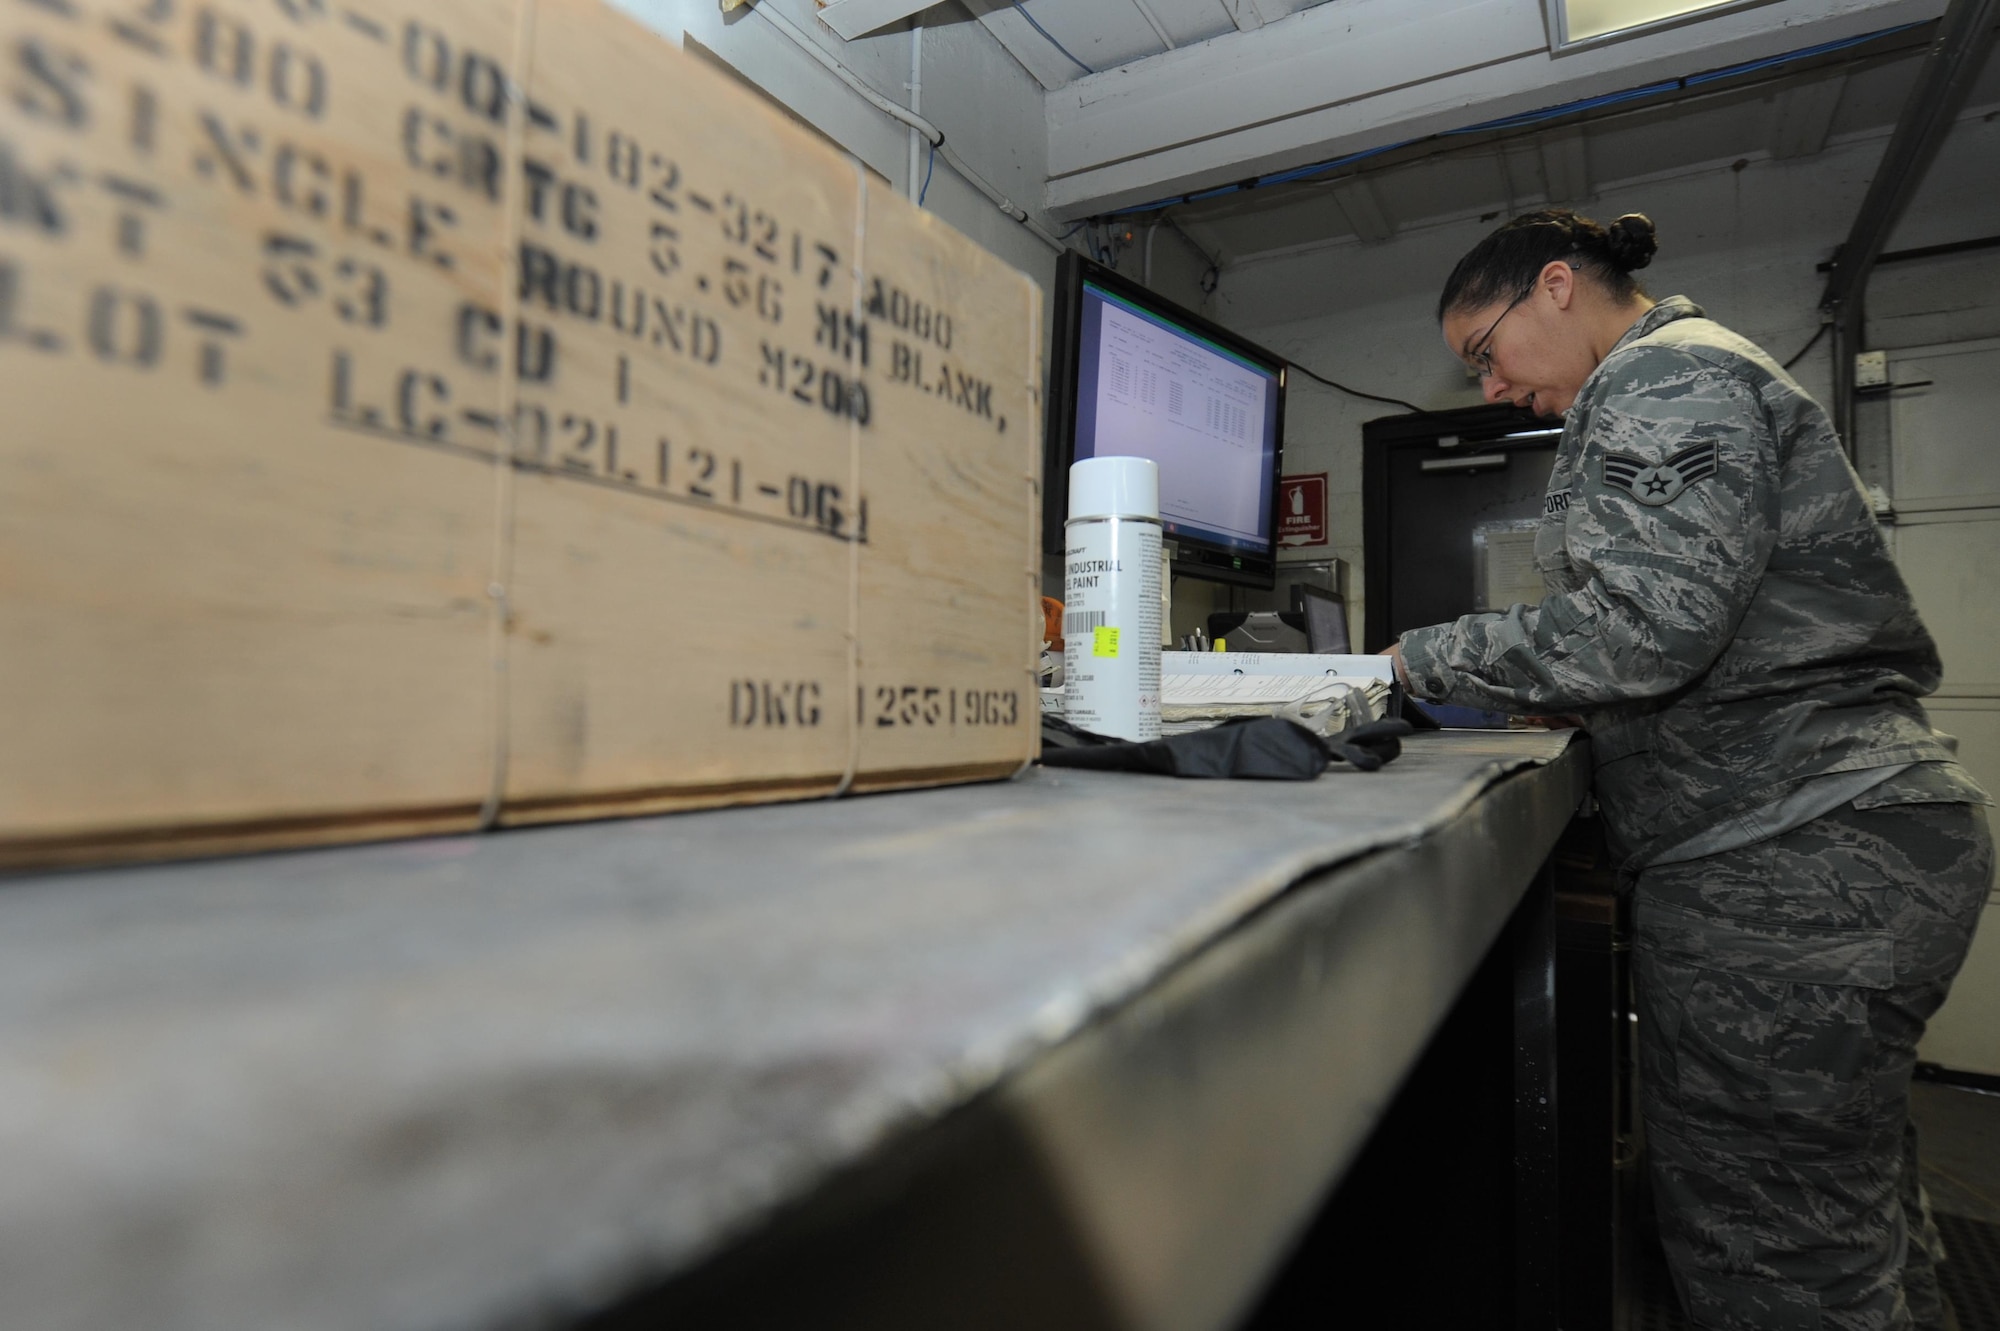 U.S. Air Force Senior Airman Angela Barbour, 19th Maintenance Squadron inspector technician, reviews a checklist before inspecting an ammunition crate for distribution Dec. 14, 2016, at Little Rock Air Force Base, Ark. The munitions flight members complete a variety of different tasks ranging from storing ammunition to inspecting munitions. (U.S. Air Force photo by Airman 1st Class Grace Nichols)